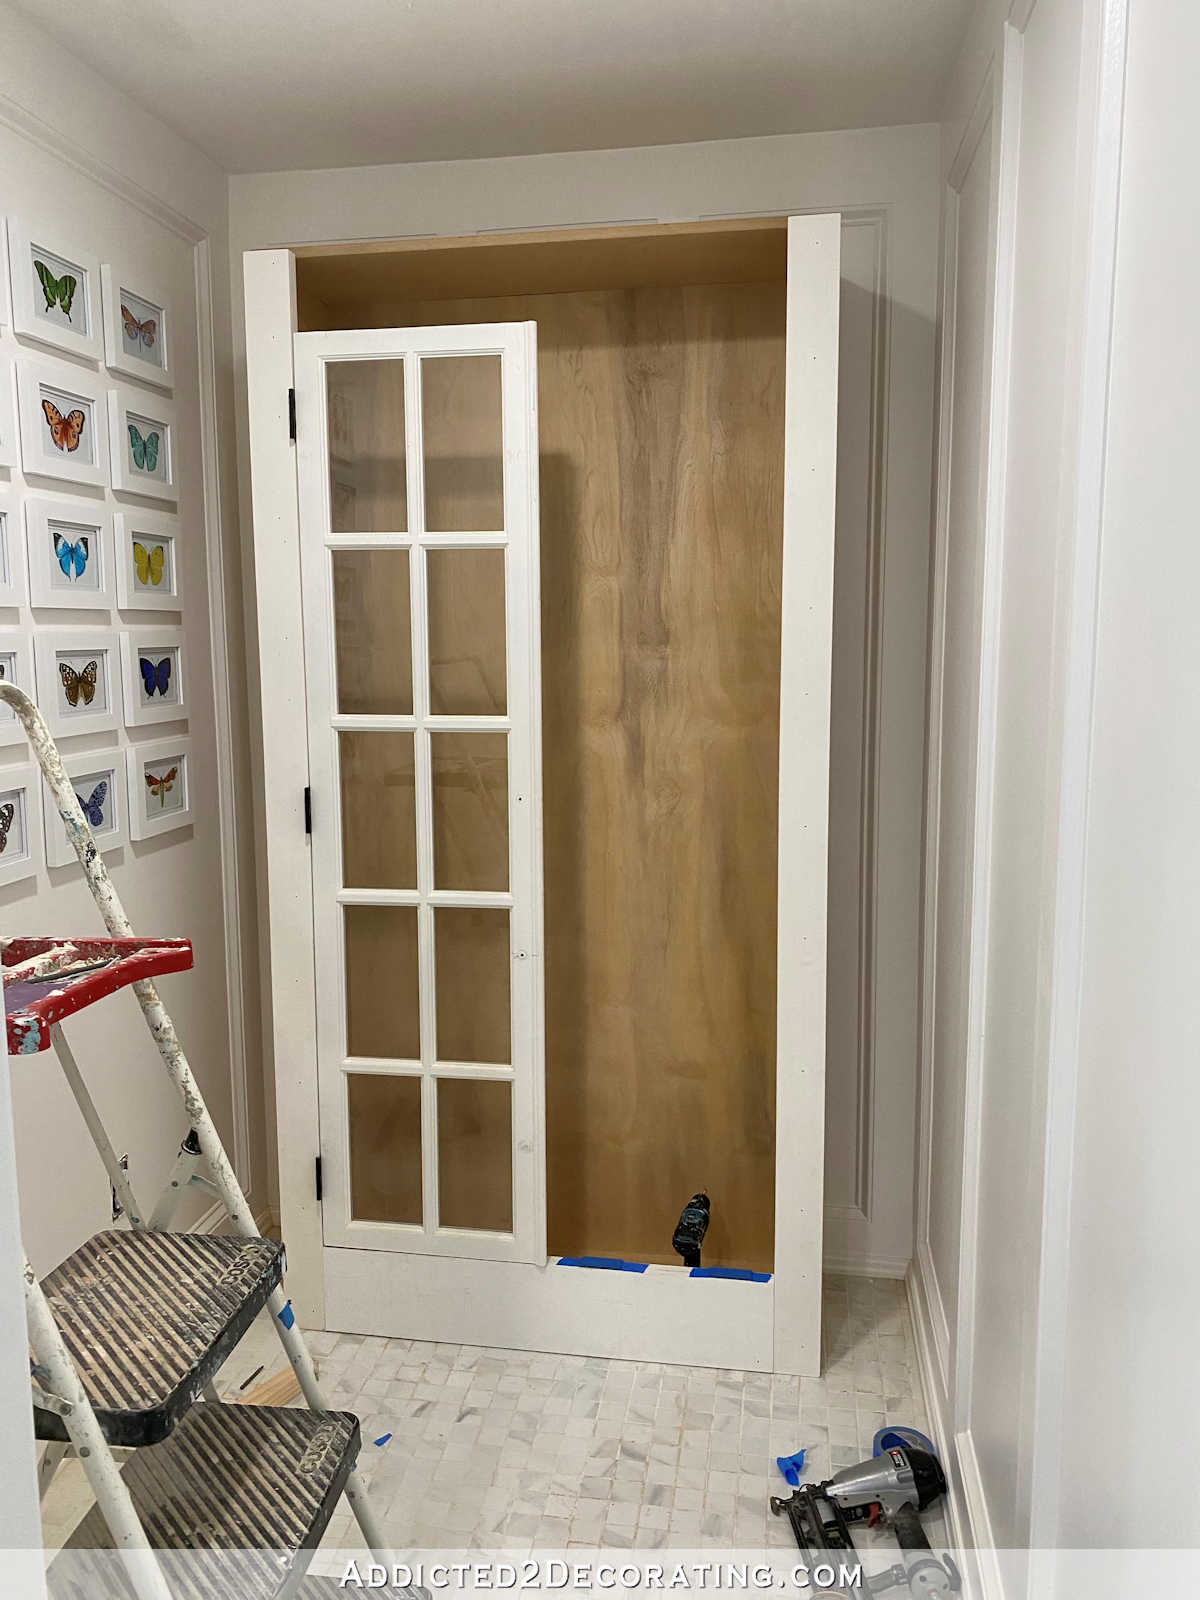 DIY: How To Build A Storage Cabinet With French Doors (Part 1 — The Basic Build)